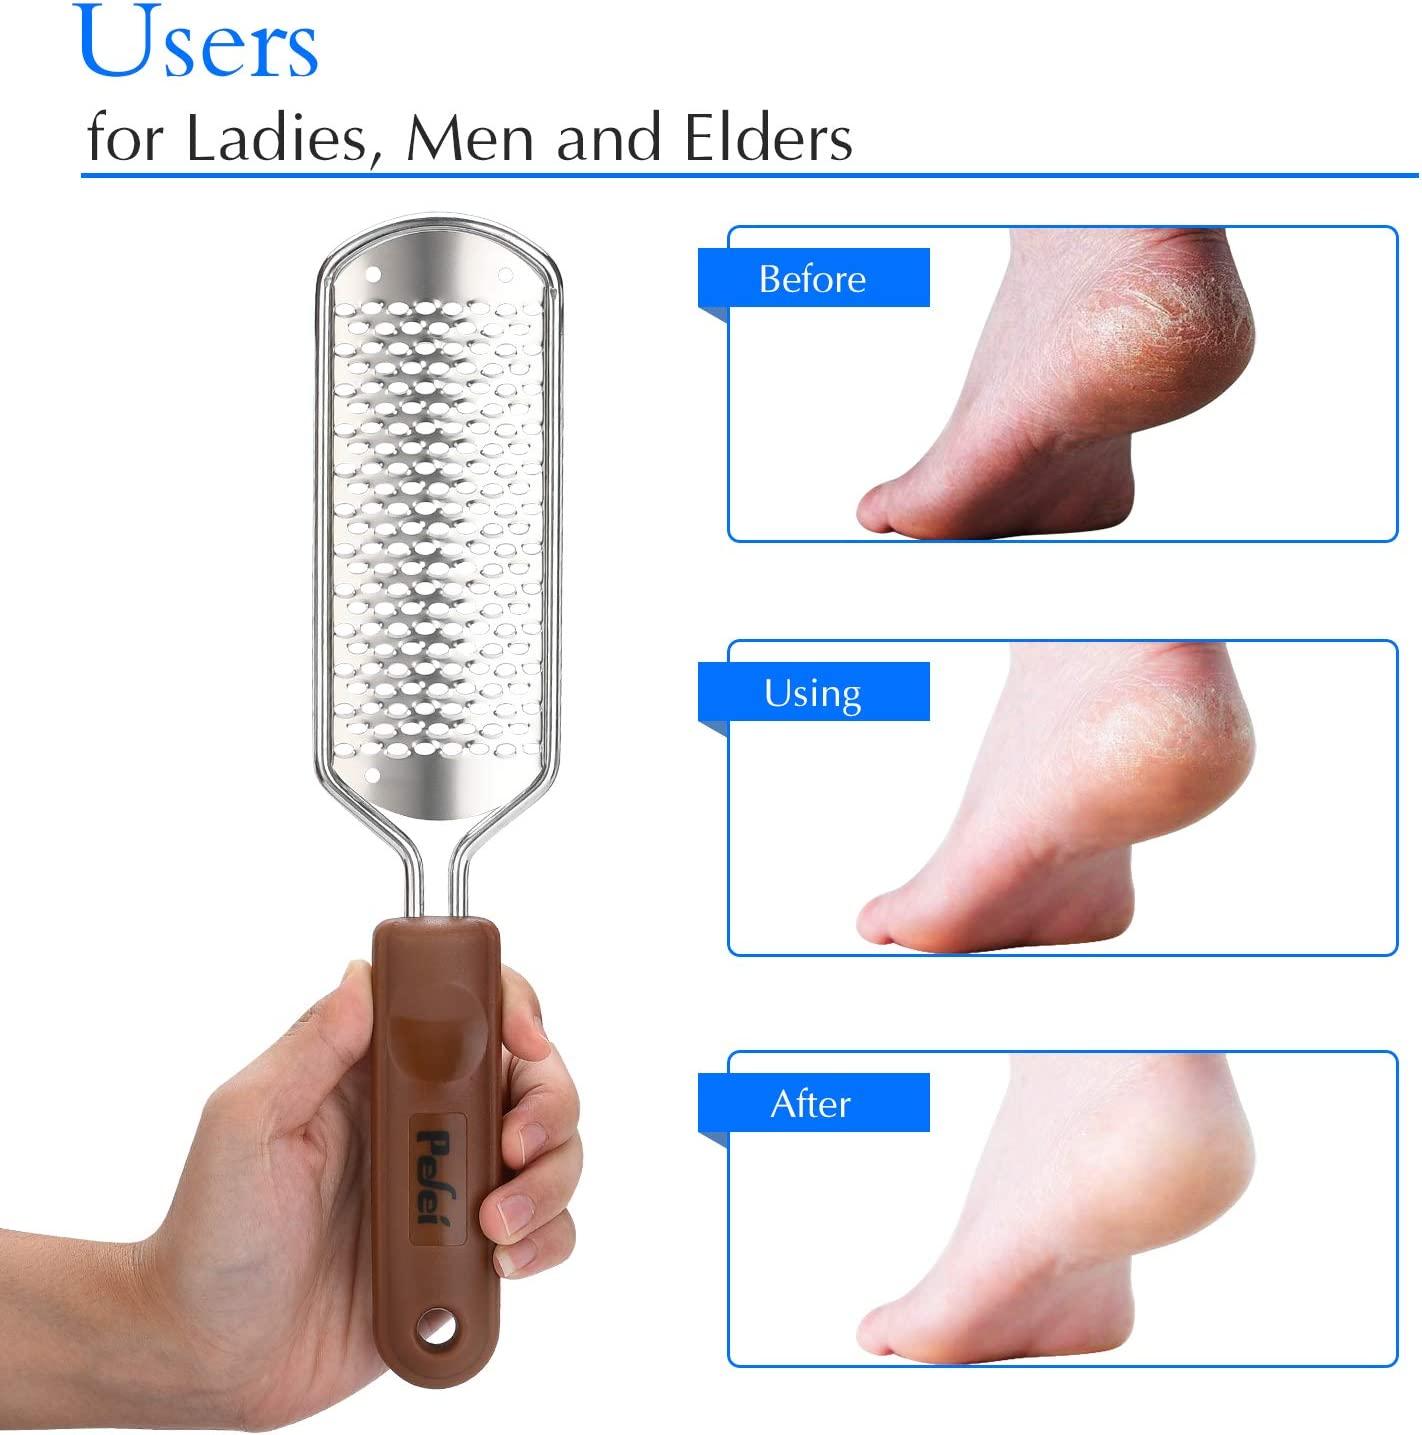 Colossal Pedicure Rasp Foot File, Professional Foot Care Pedicure Stainless  Steel File to Removes Hard Skin, Can Be Used On Both Dry and Wet Feet